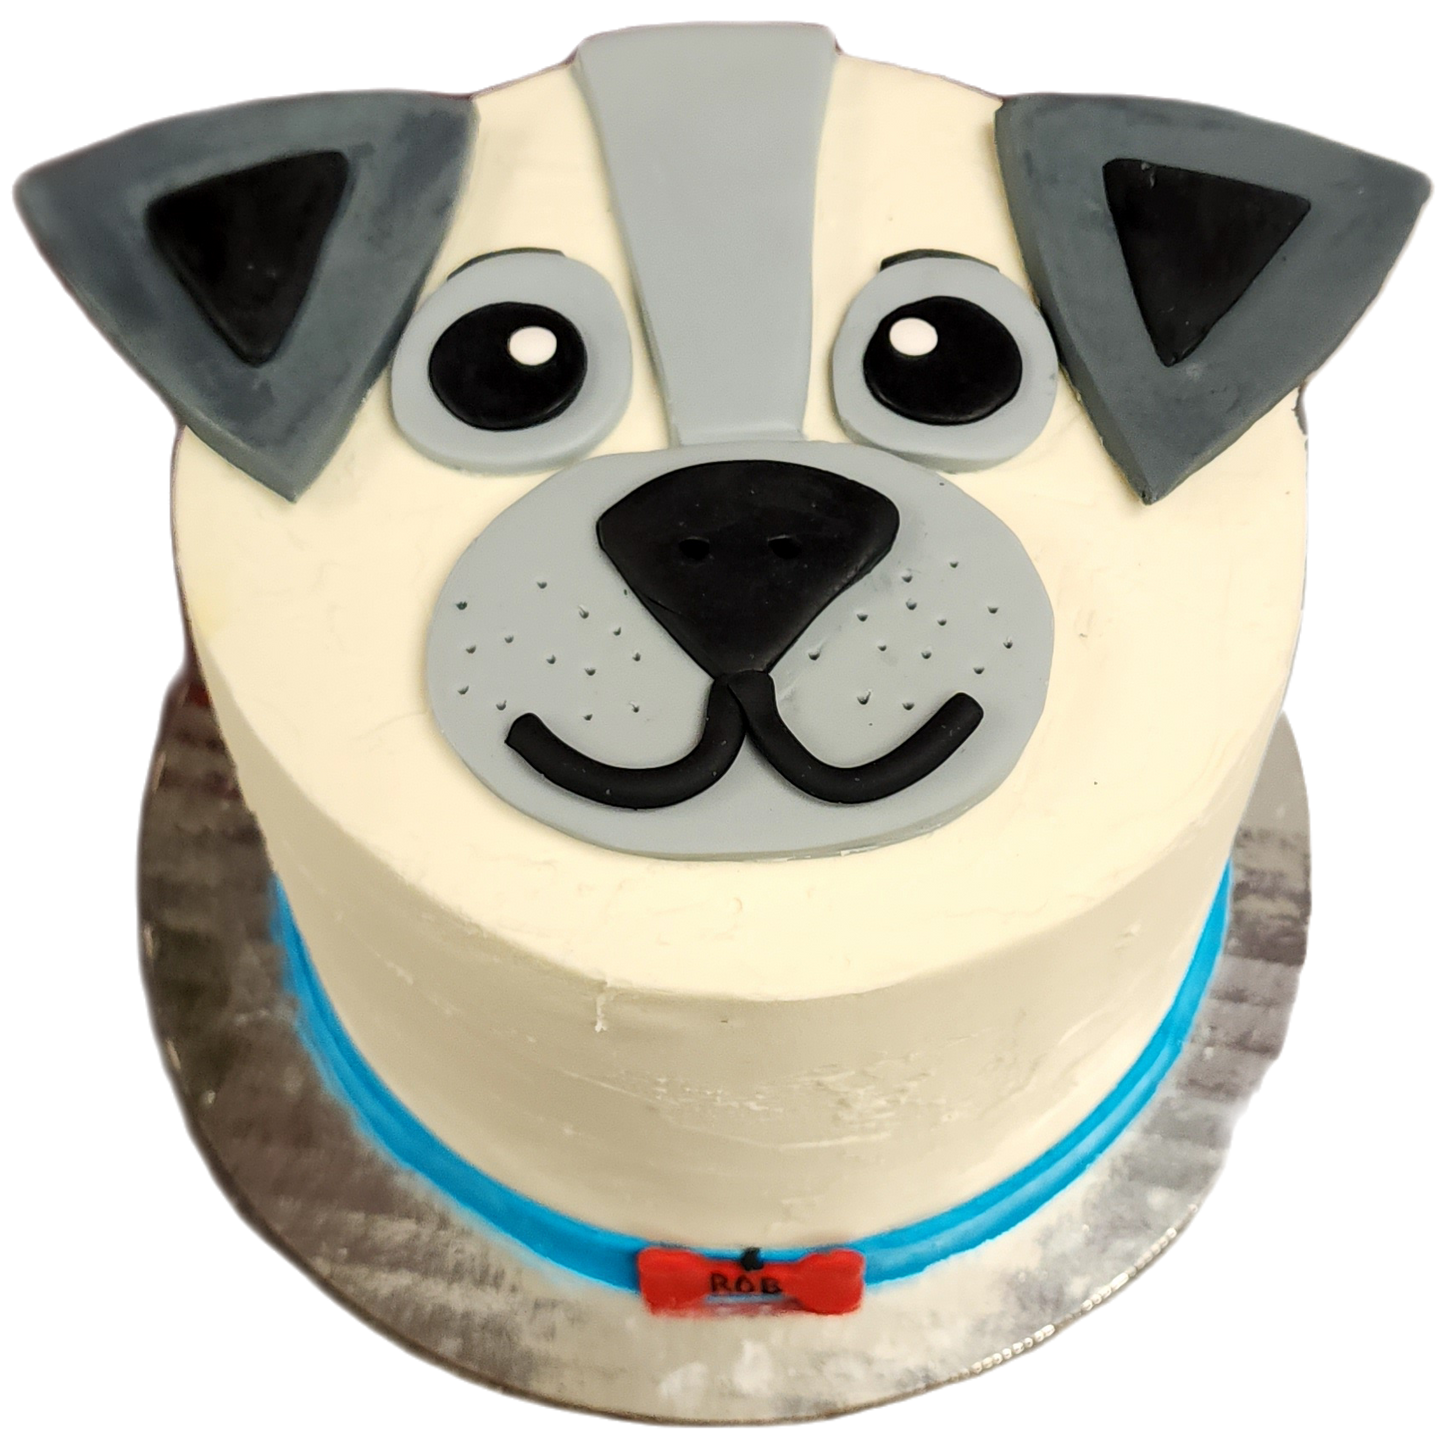 A white dog-face cake with gray features and a blue collar made during a DIY cake-decorating workshop